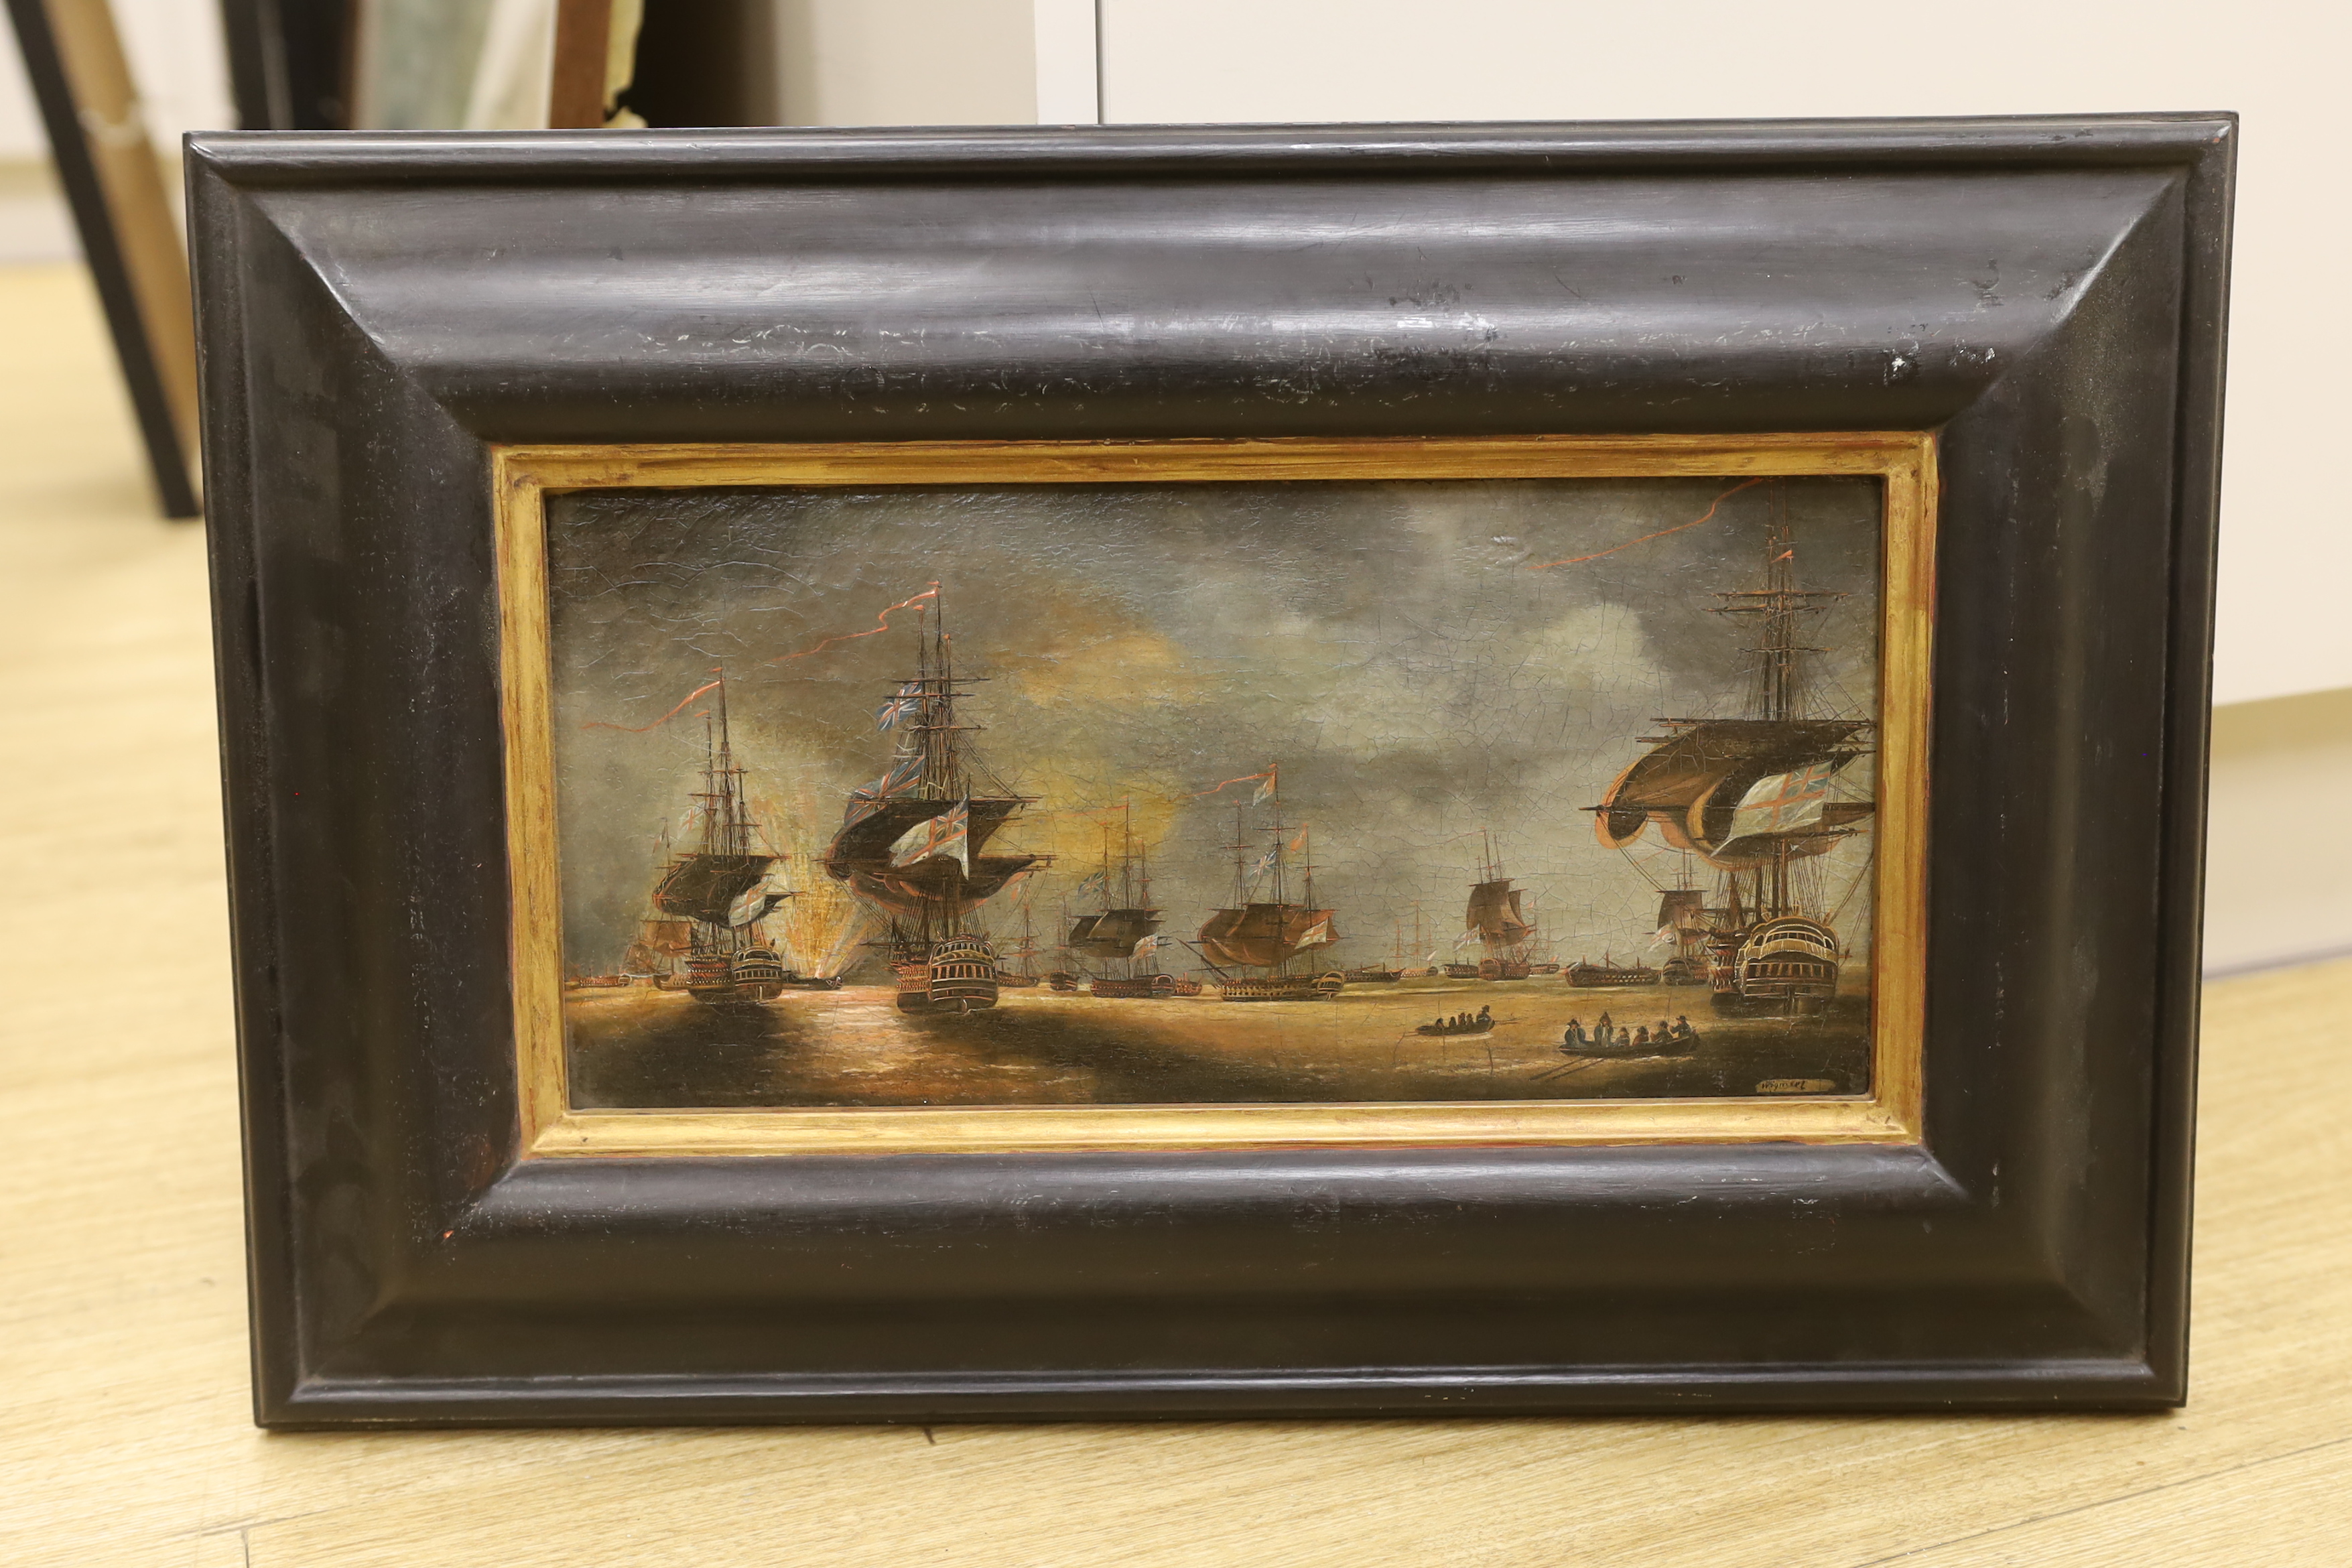 Wigmore (?), 19th century, oil on canvas, British naval and fire ships in a harbour, signed, 17 x 36cm